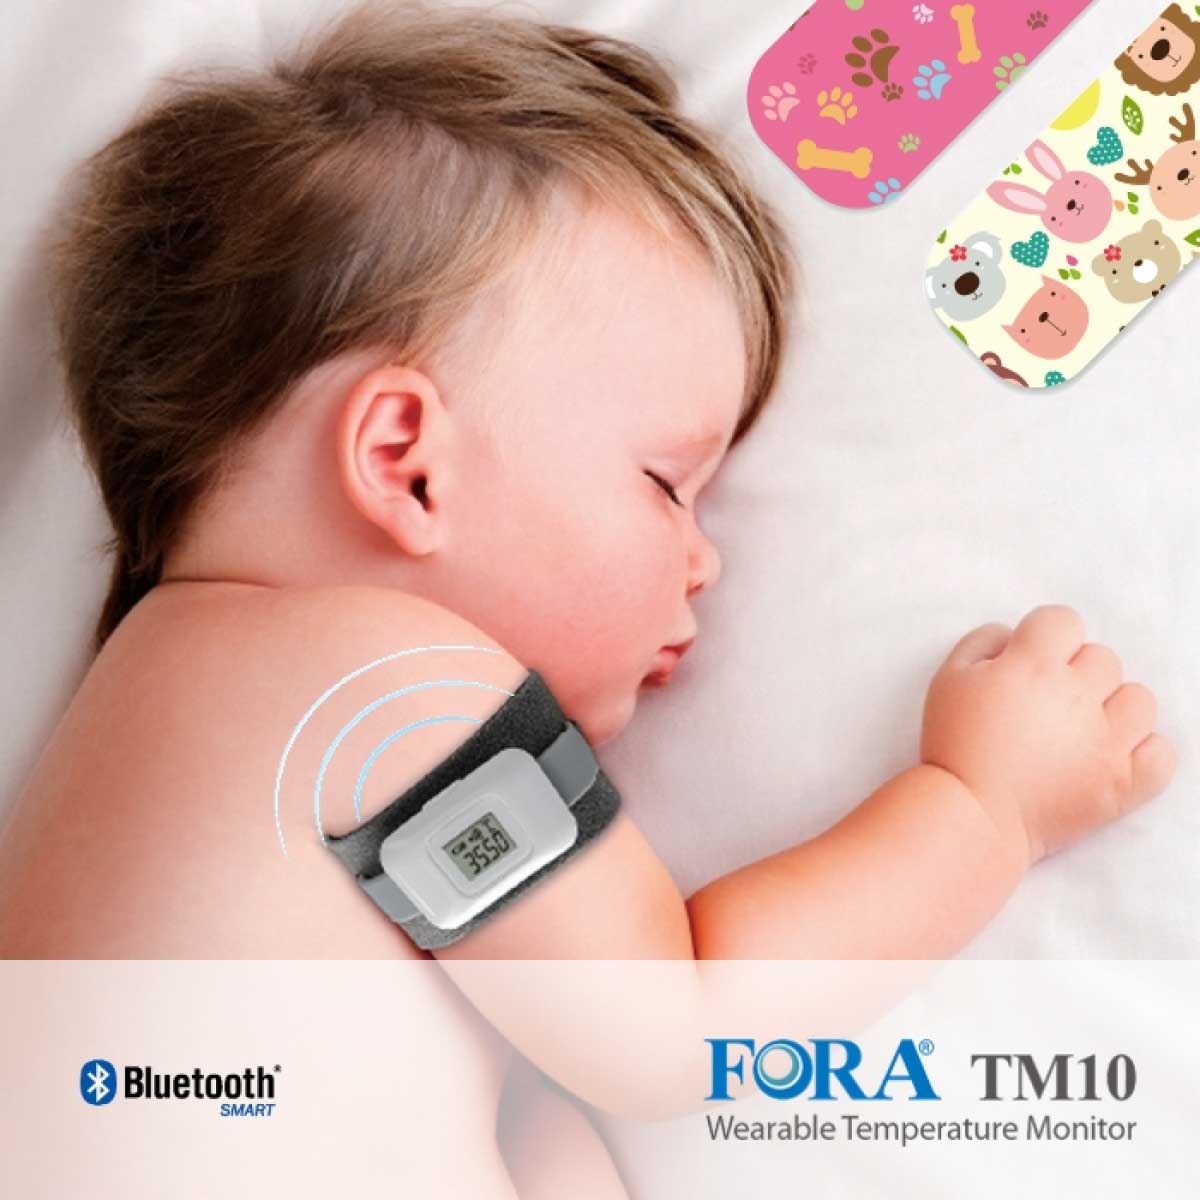 FORA TM10 Wearable Baby Thermometer with Bluetooth connectivity. Transfer  data to iFORA BM smartphone app. Get trends and customize alarms…